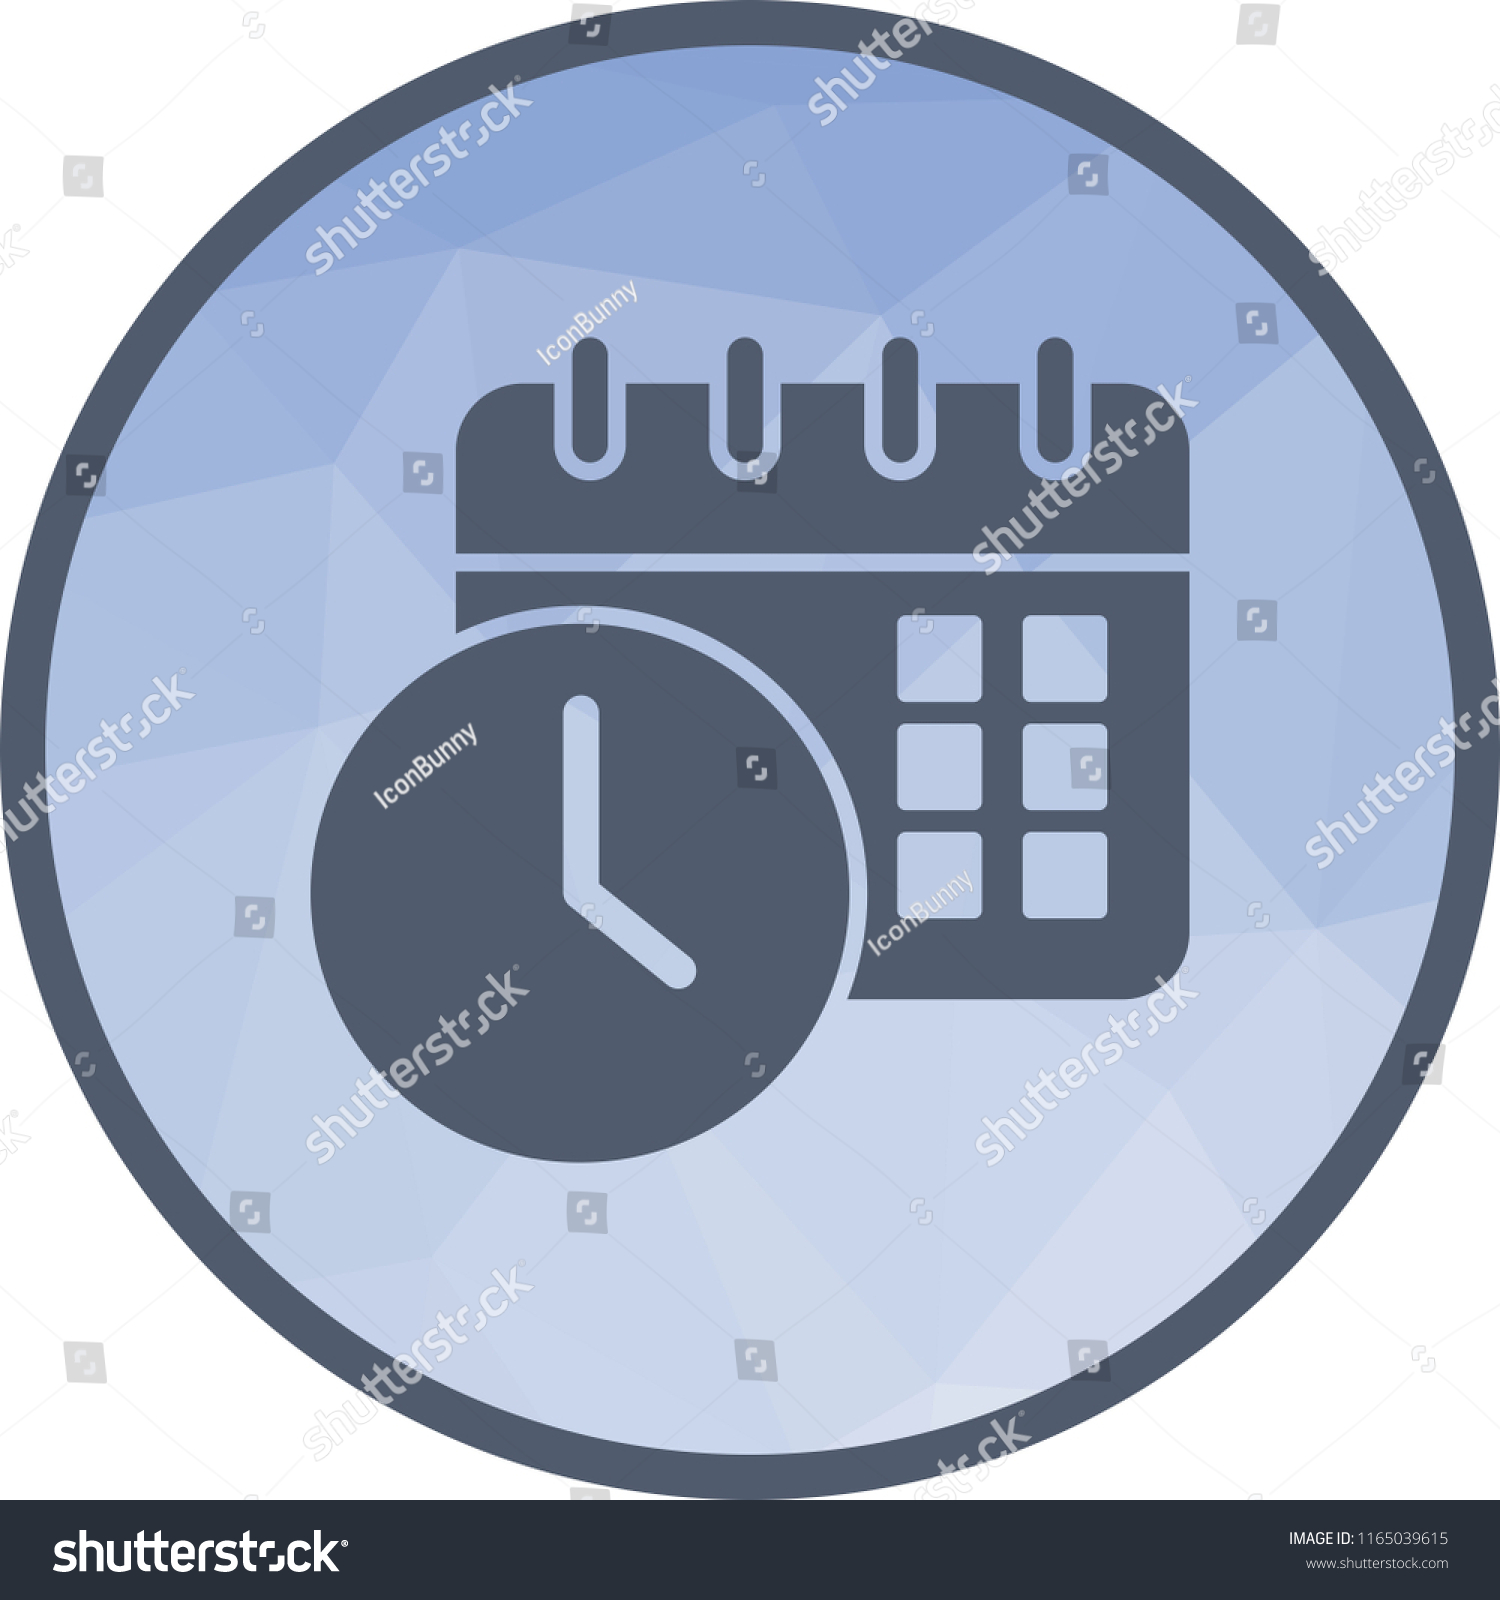 Scheduled Date And Time Royalty Free Stock Vector 1165039615